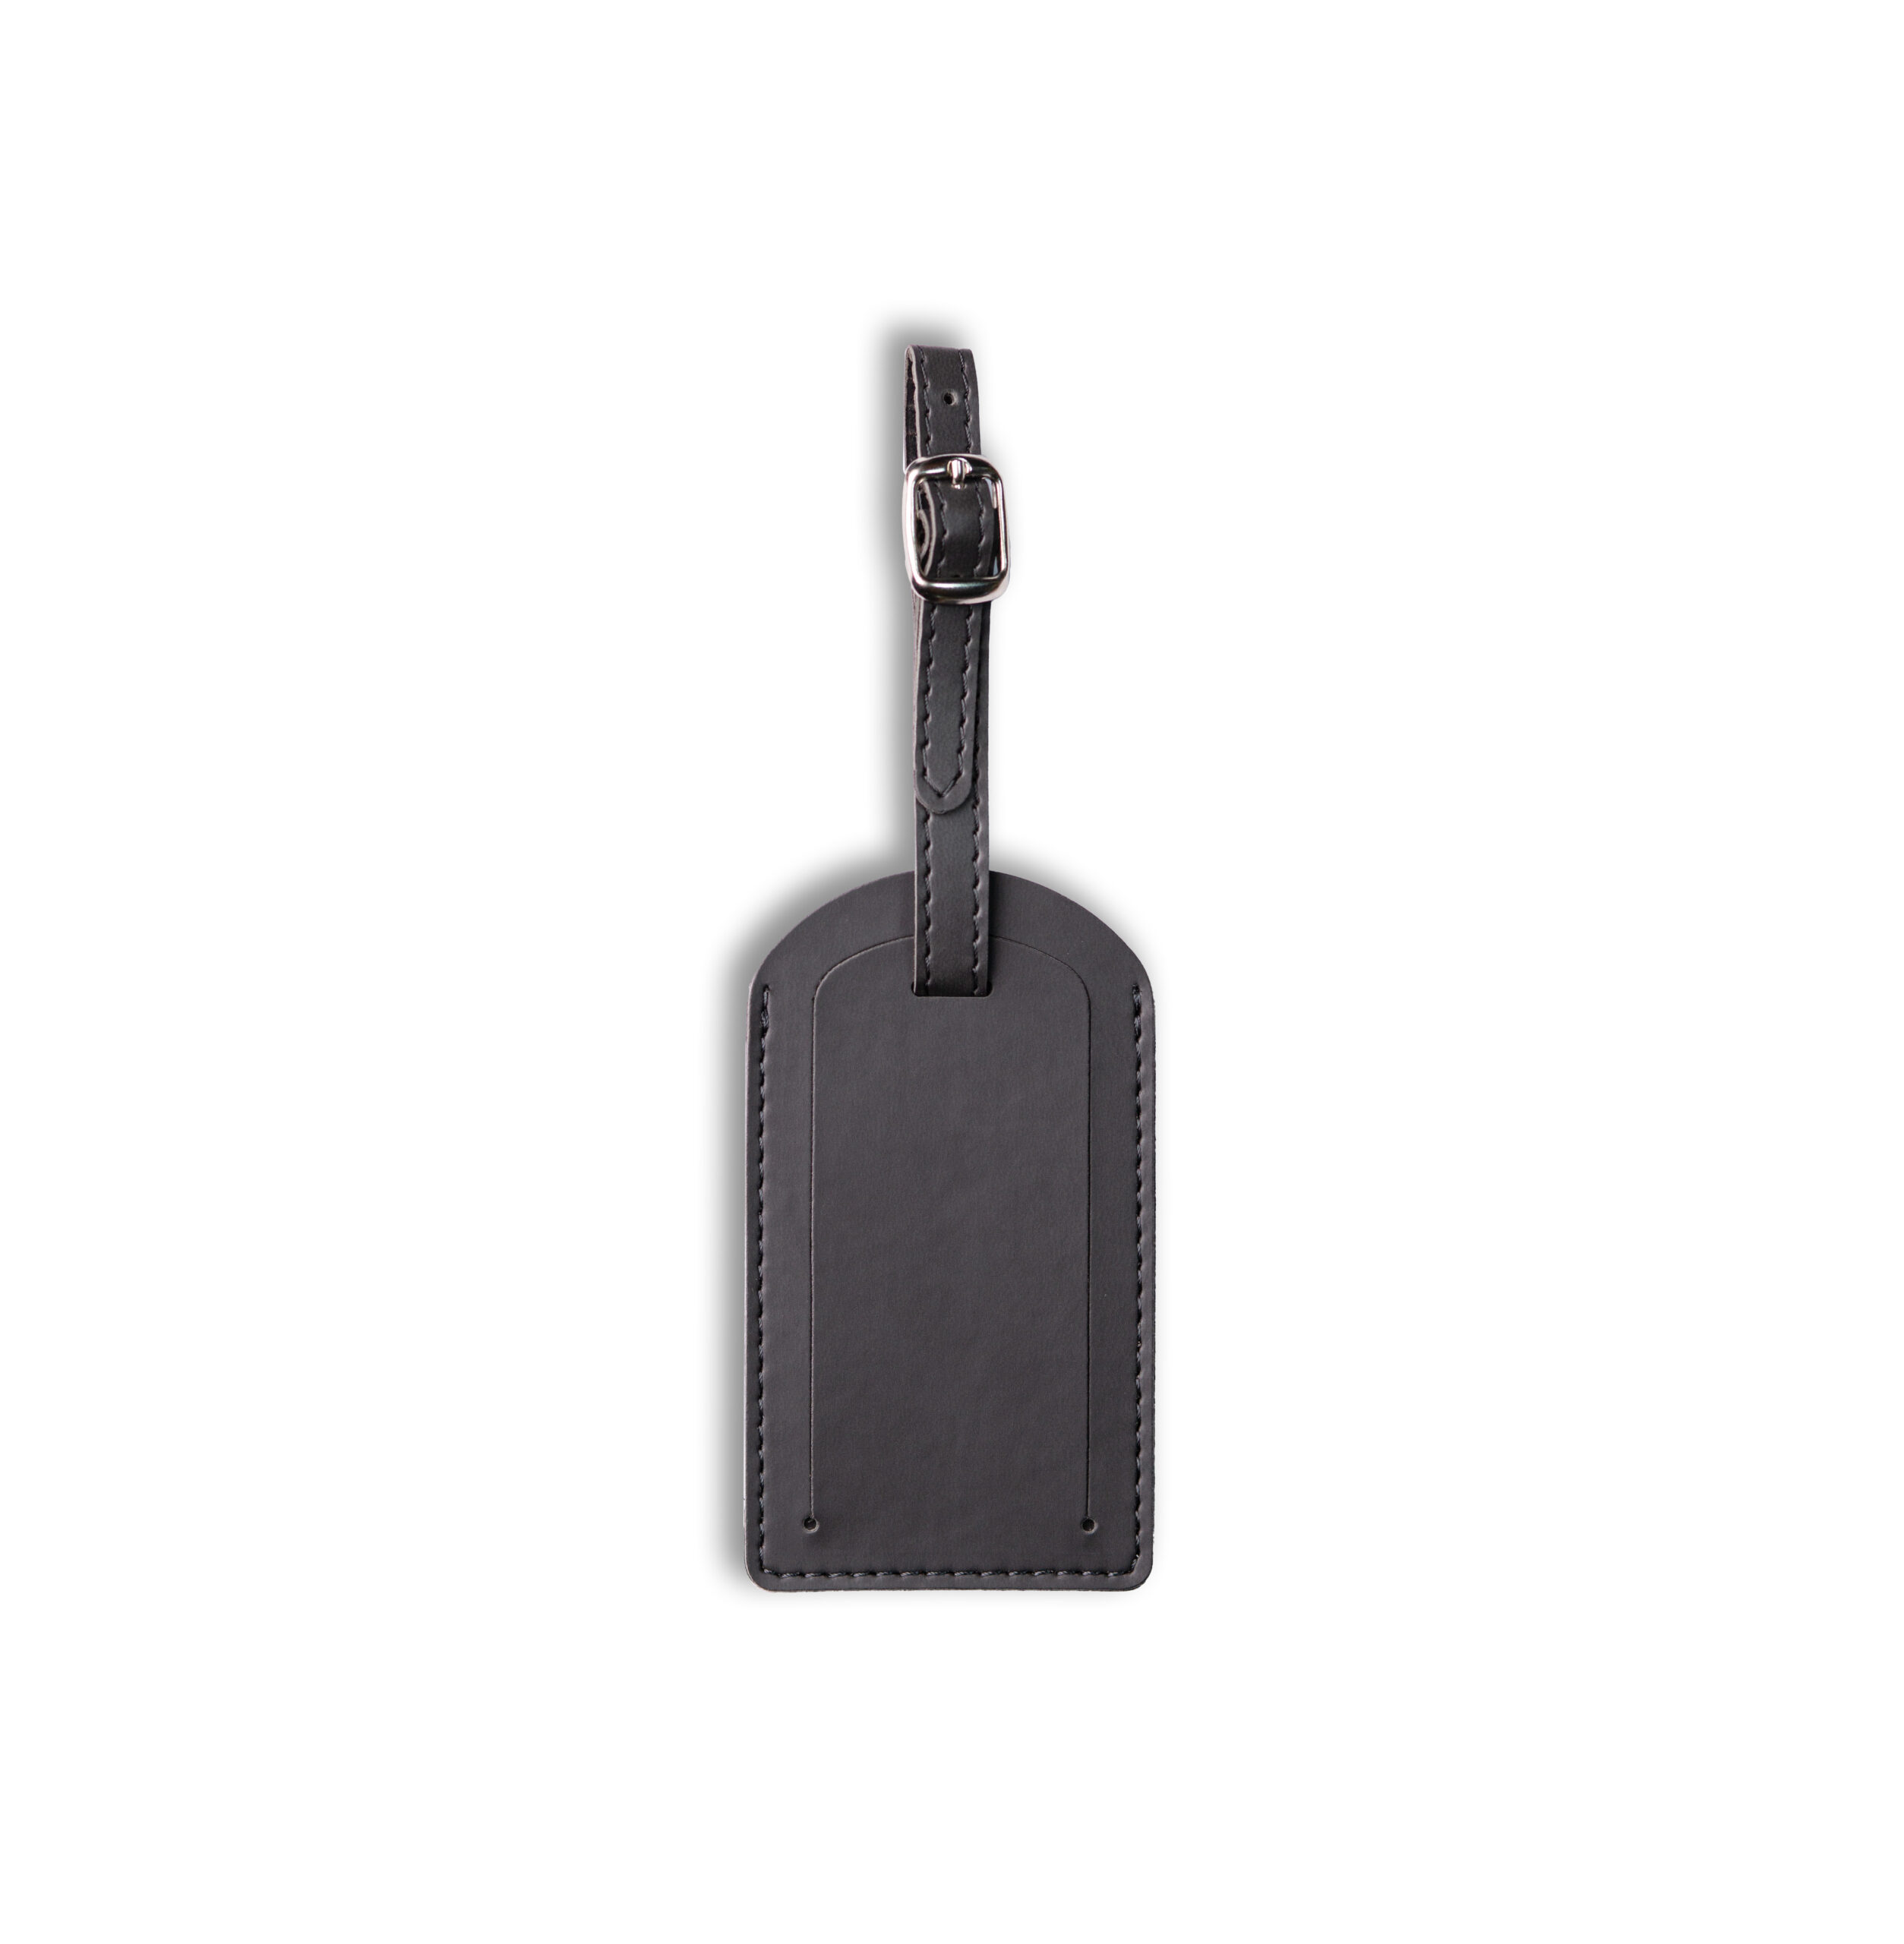 NewHide Luggage Tag Standard Size - Abbeygate Manufacturing